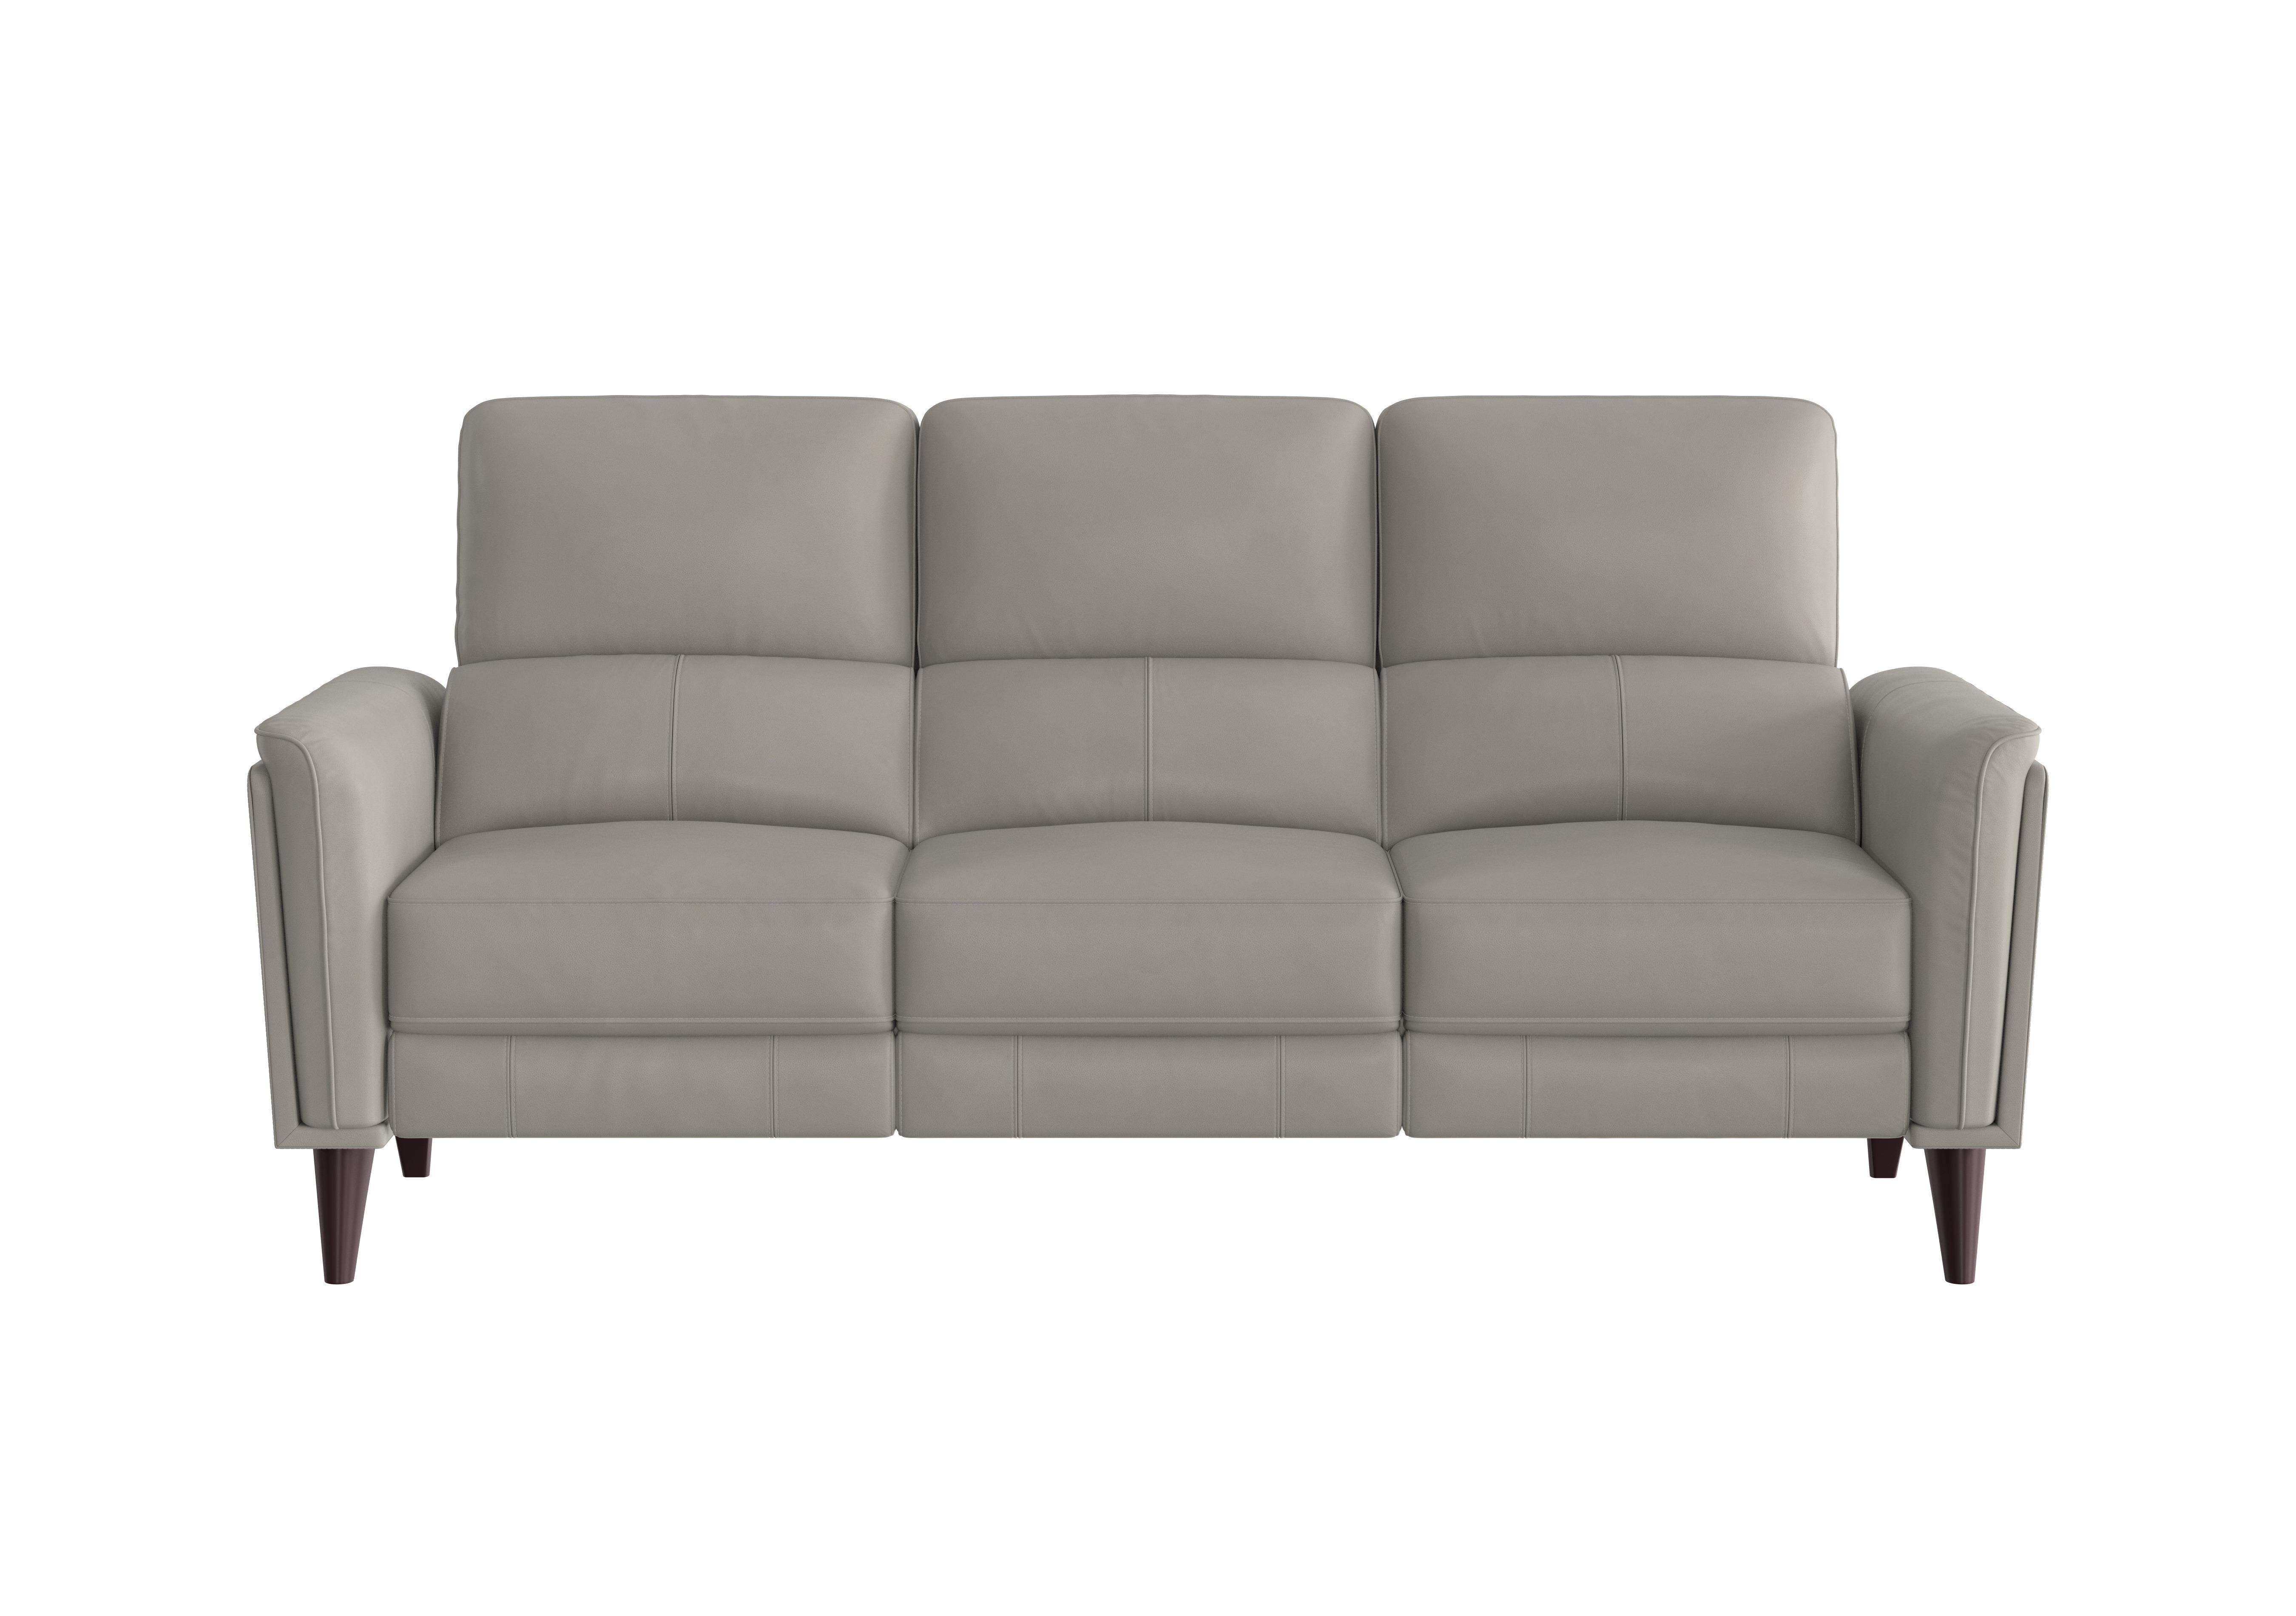 Compact Collection Klein 3 Seater Leather Sofa in Bv-946b Silver Grey on Furniture Village